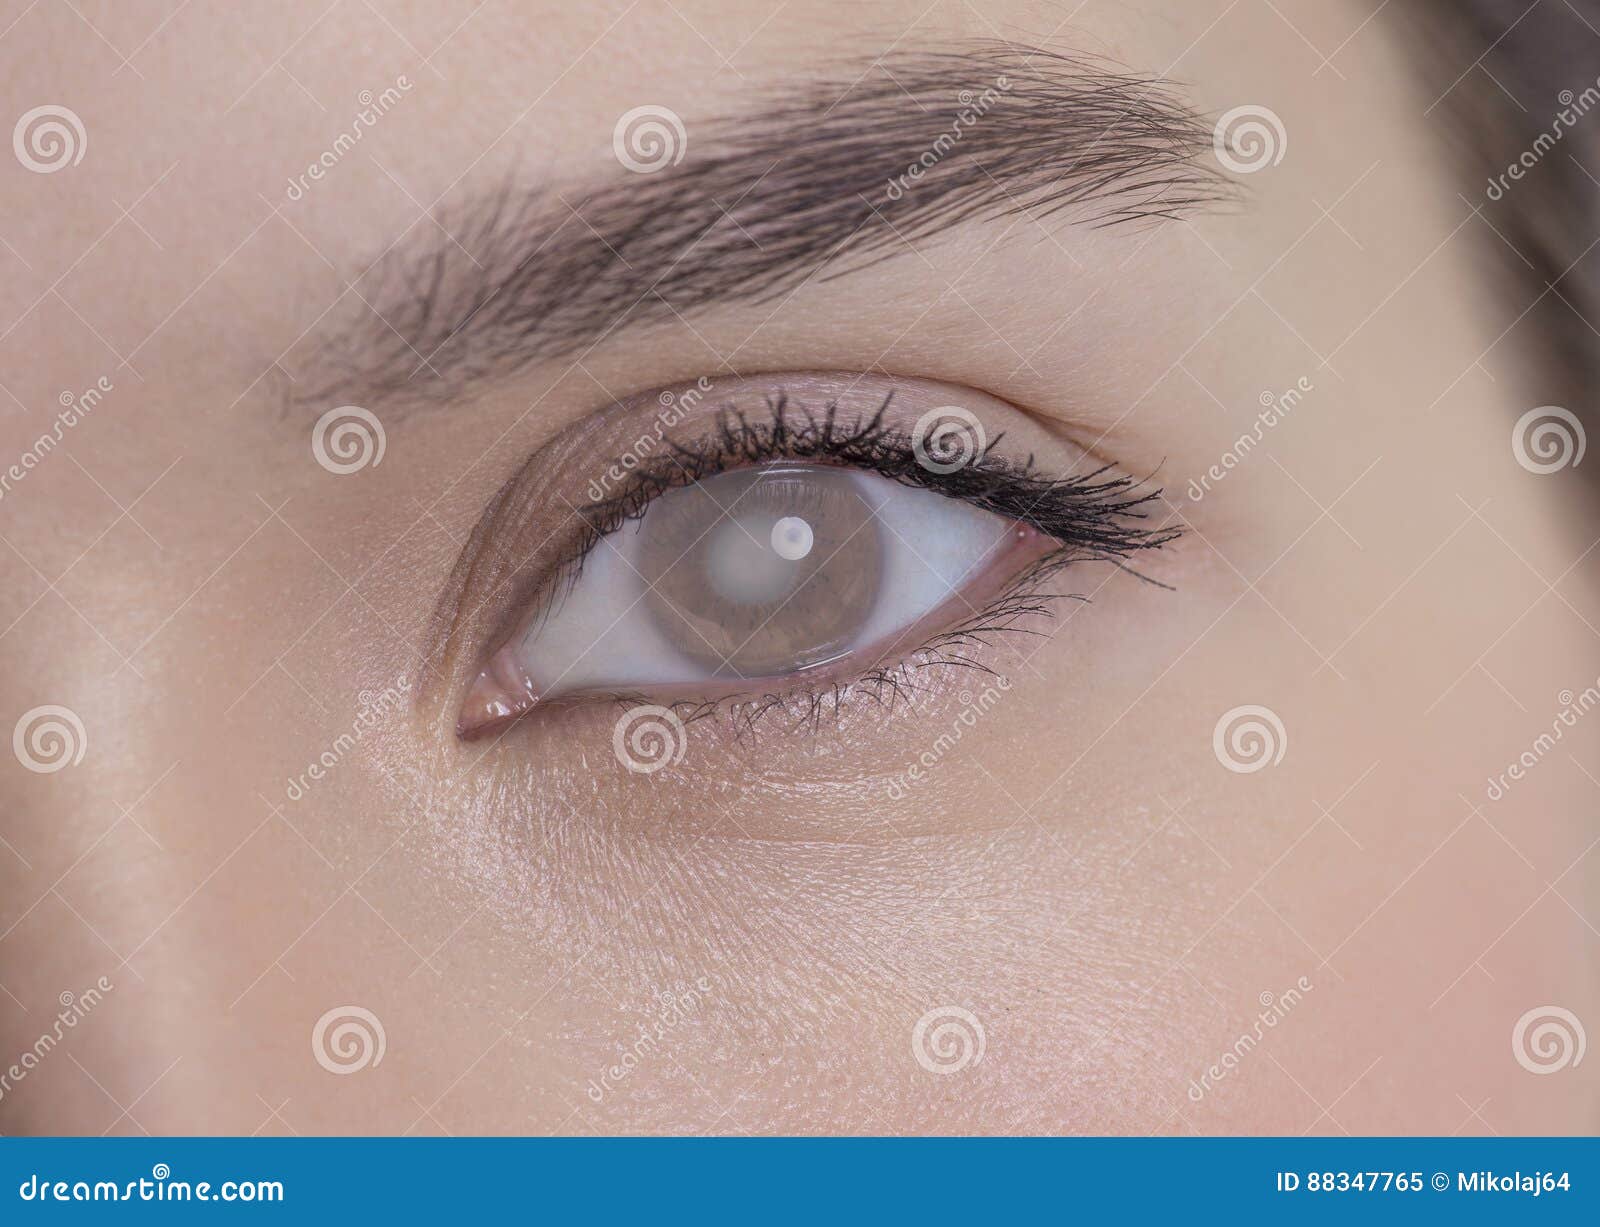 eye of a woman with cataract